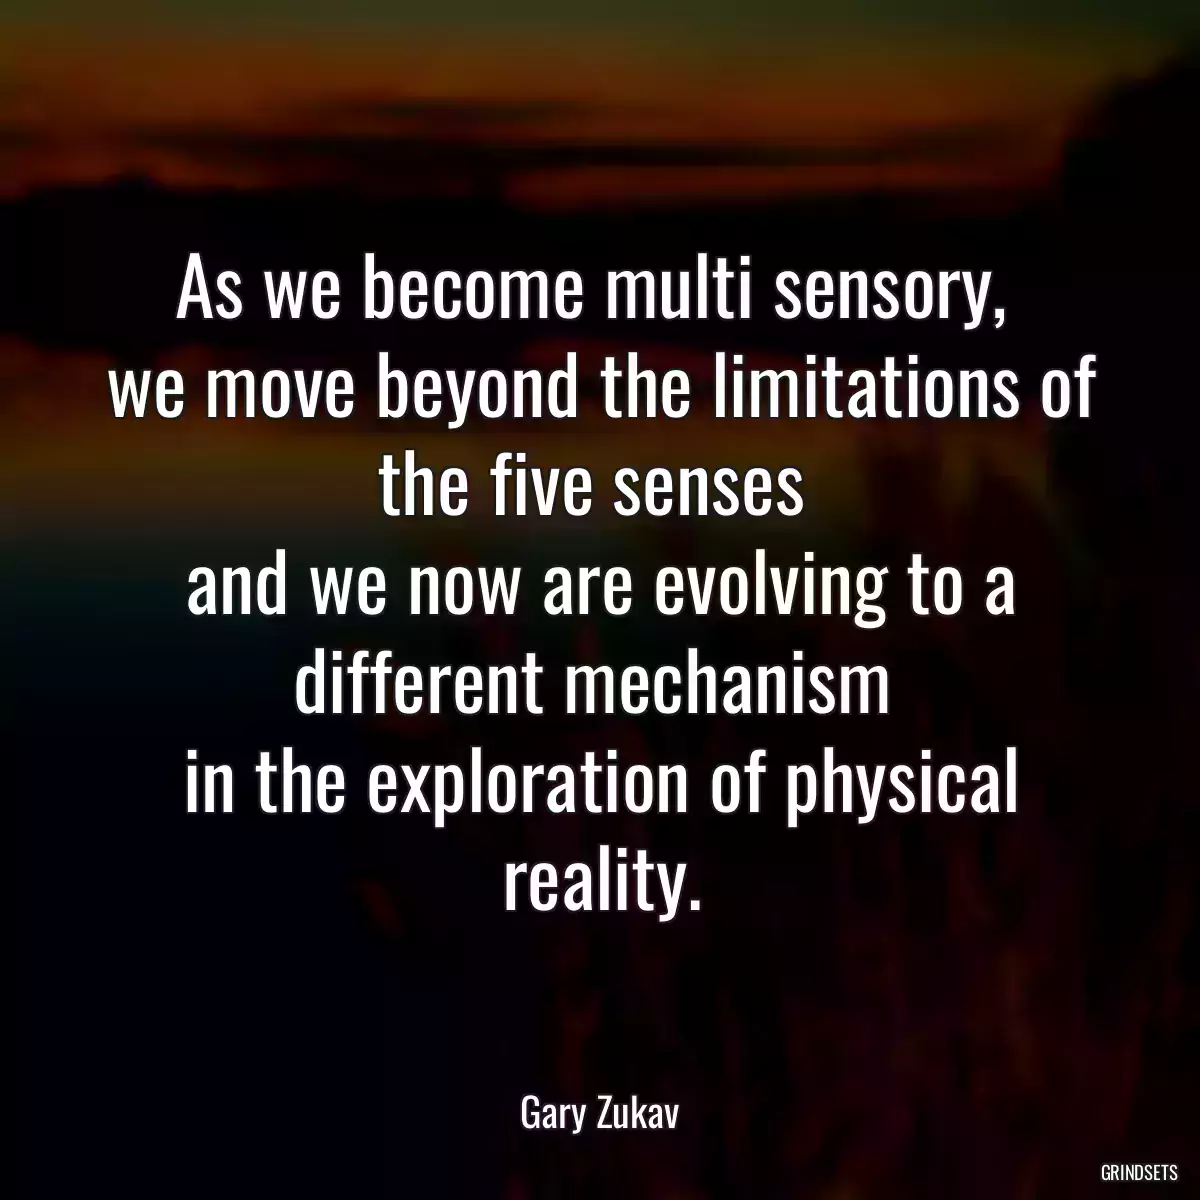 As we become multi sensory, 
we move beyond the limitations of the five senses 
and we now are evolving to a different mechanism 
in the exploration of physical reality.